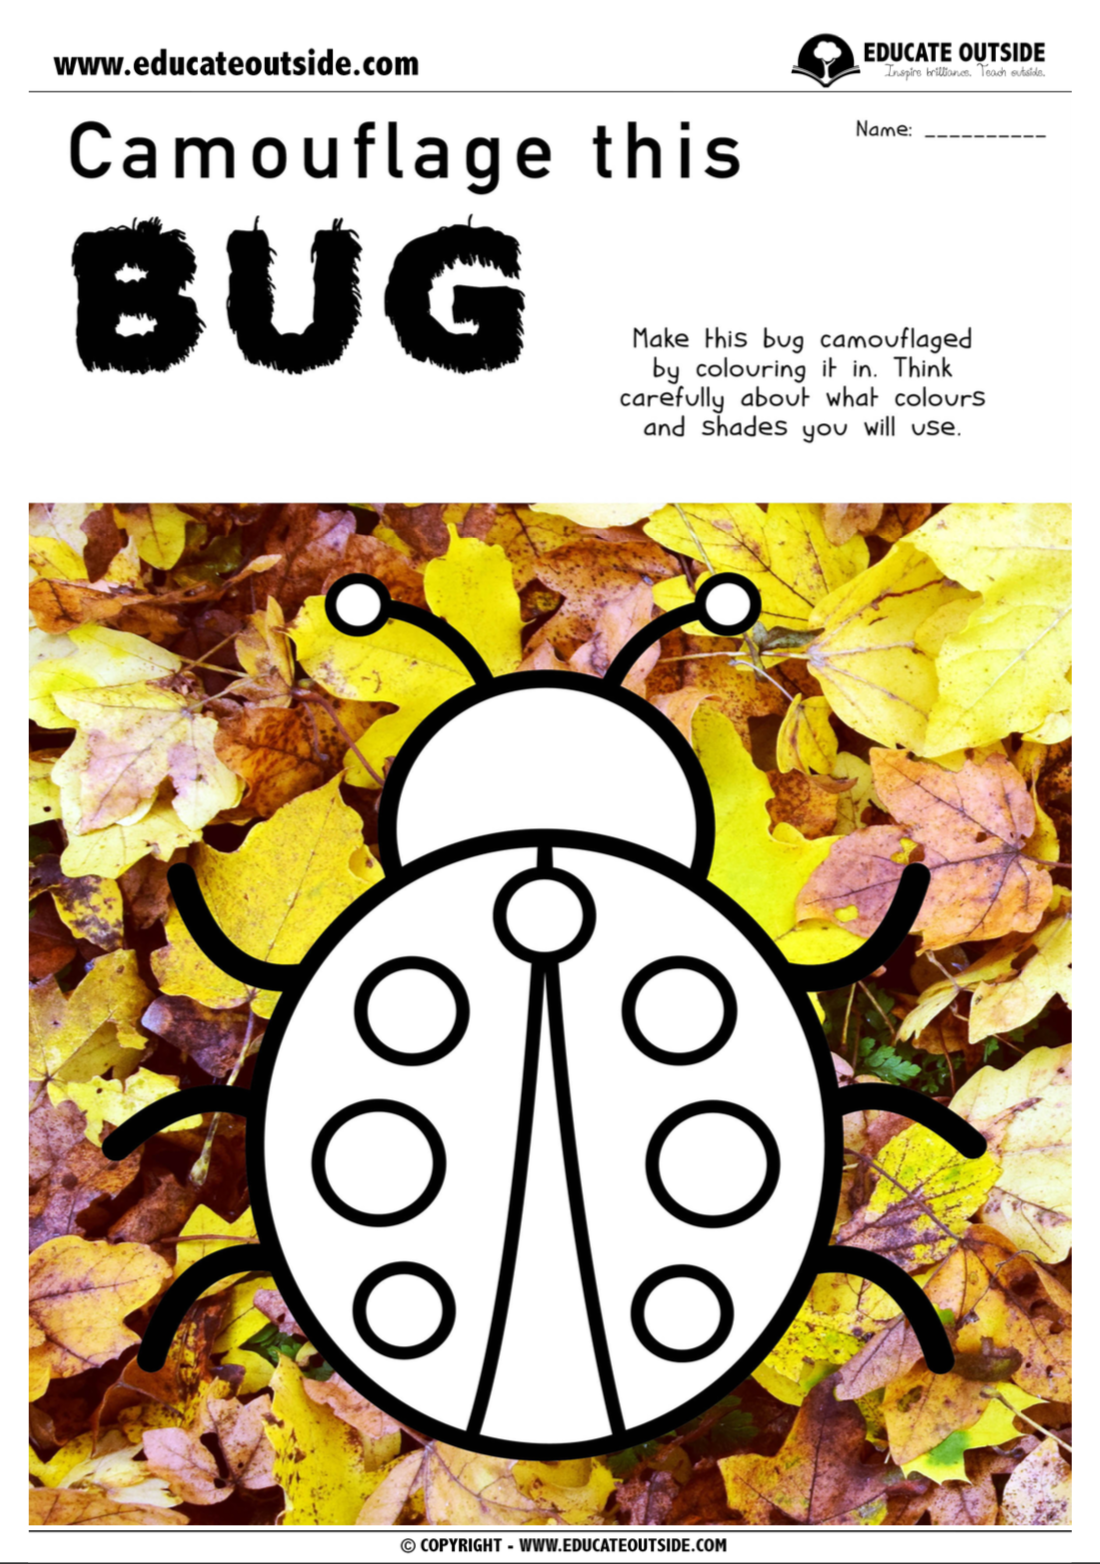 Camouflage: Find My Bug - Educate Outside